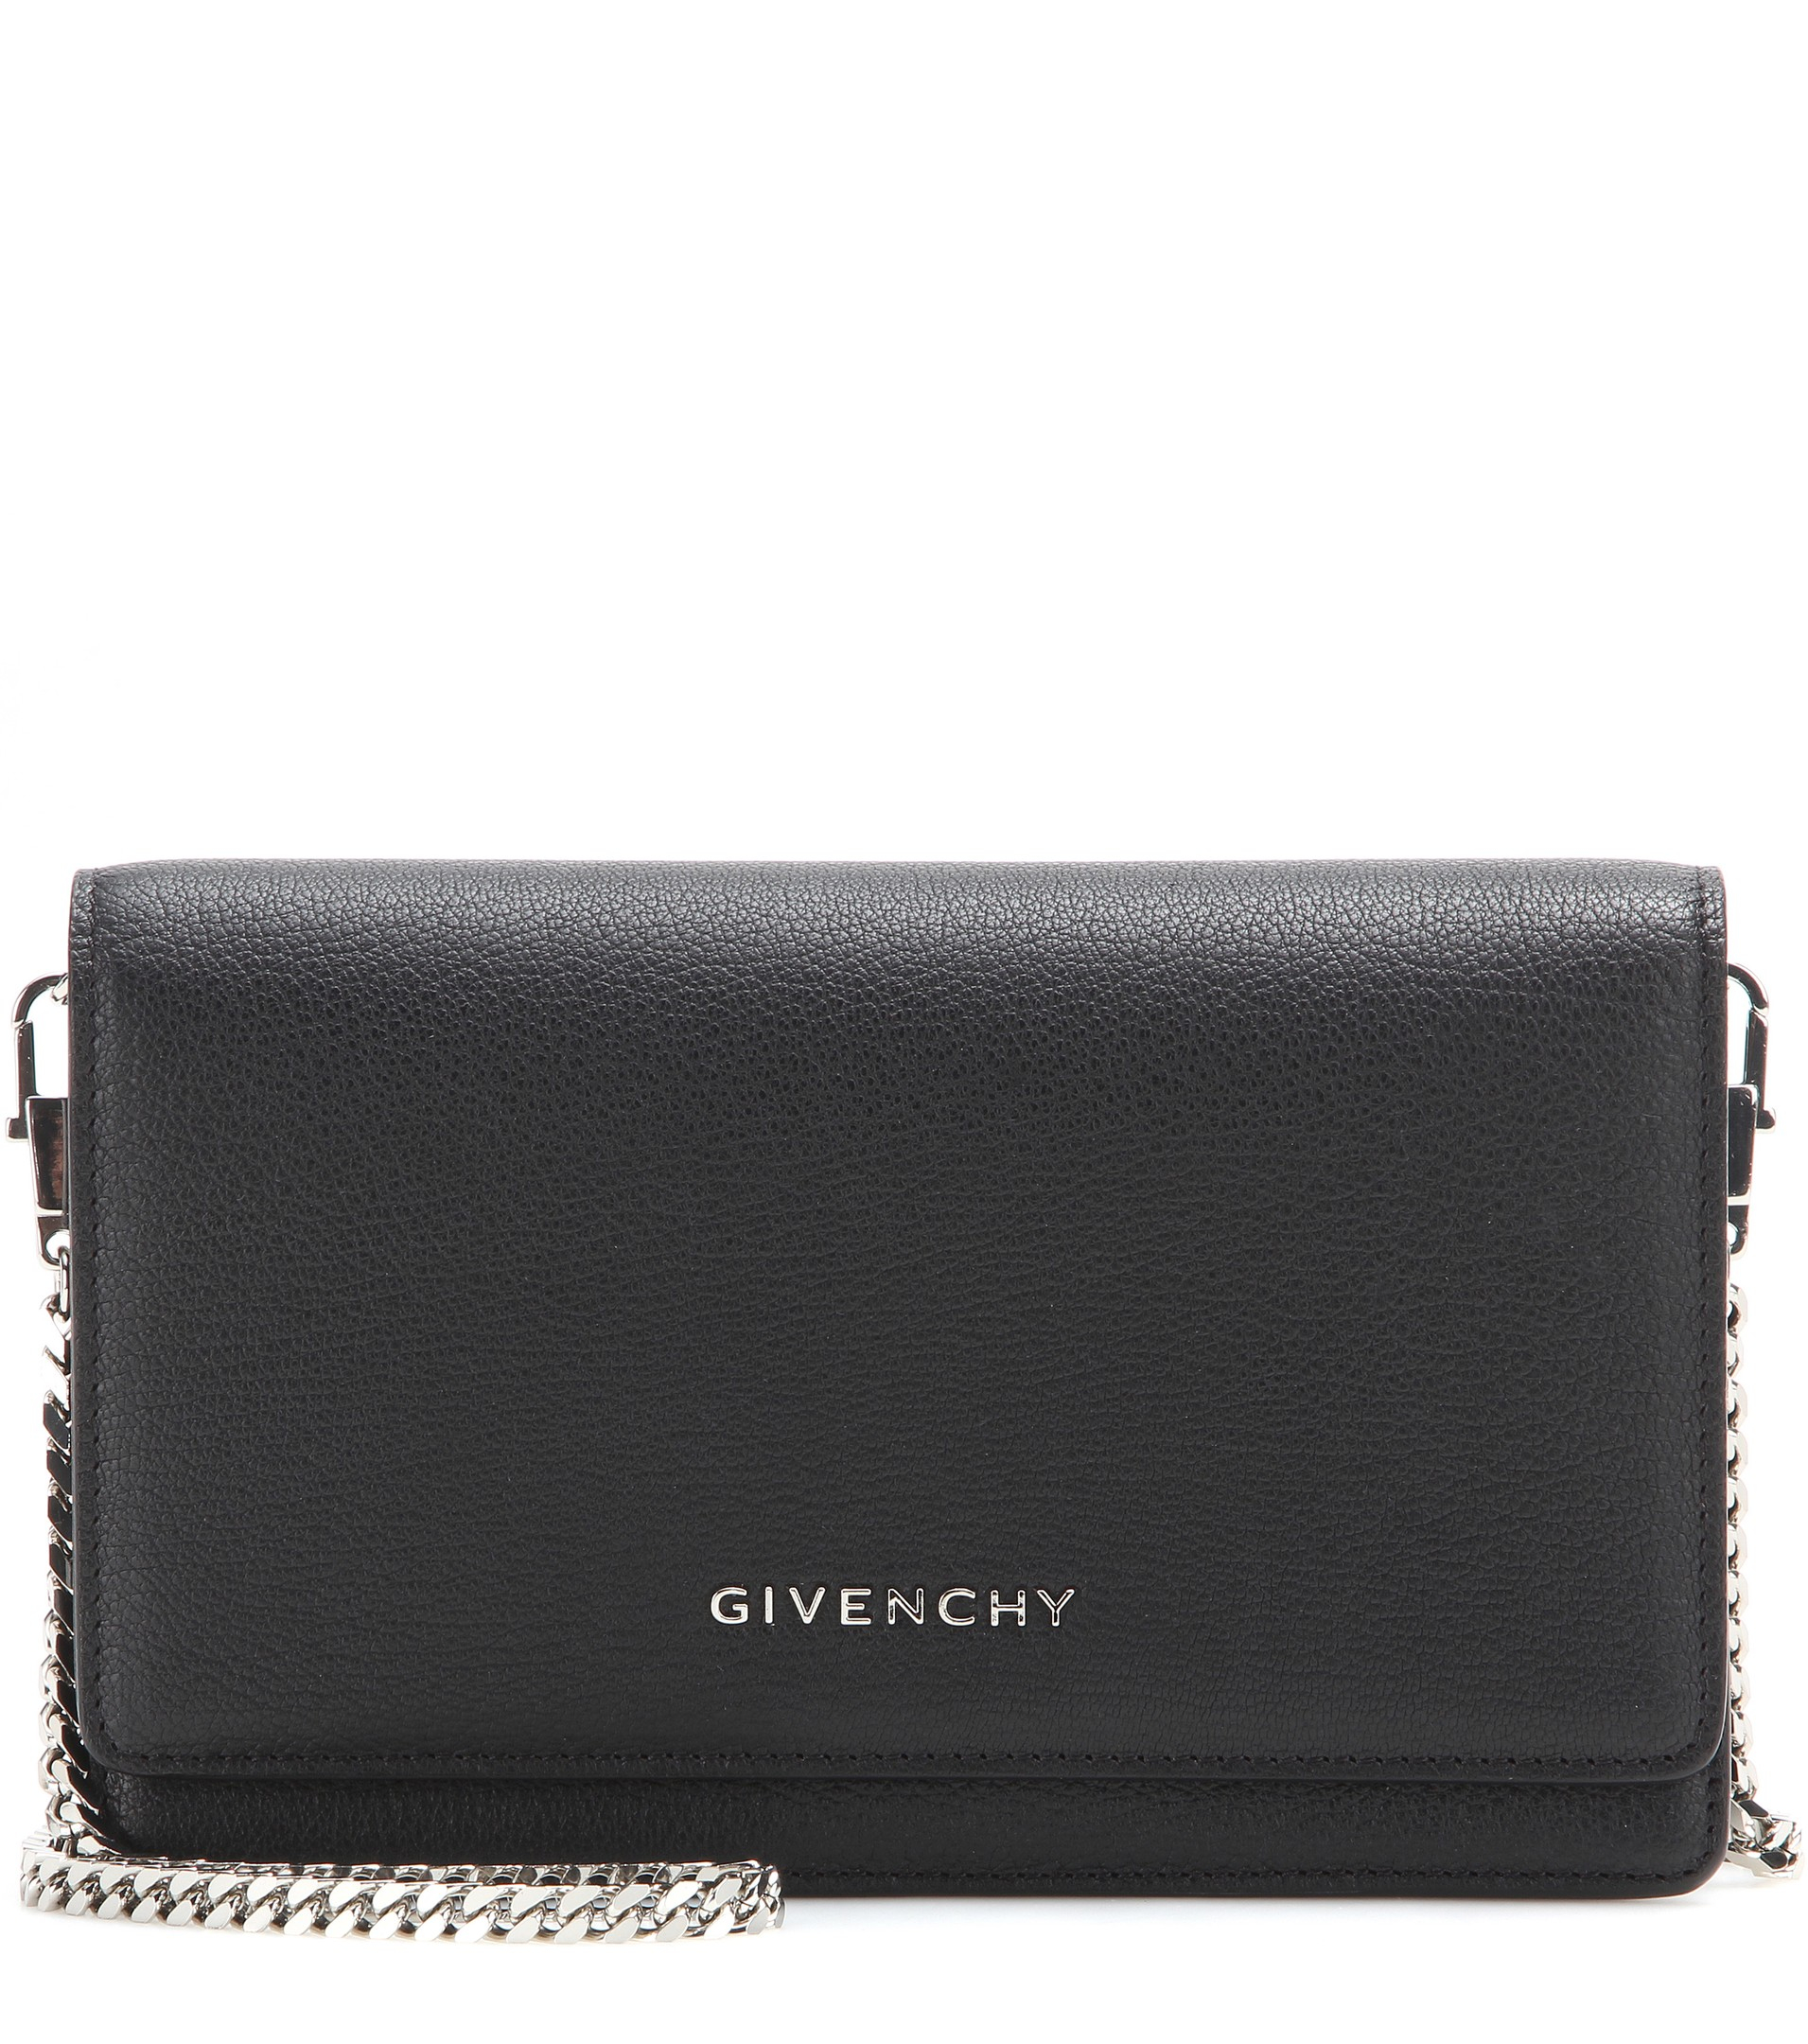 Givenchy Pandora Chain Leather Shoulder Bag in Black | Lyst